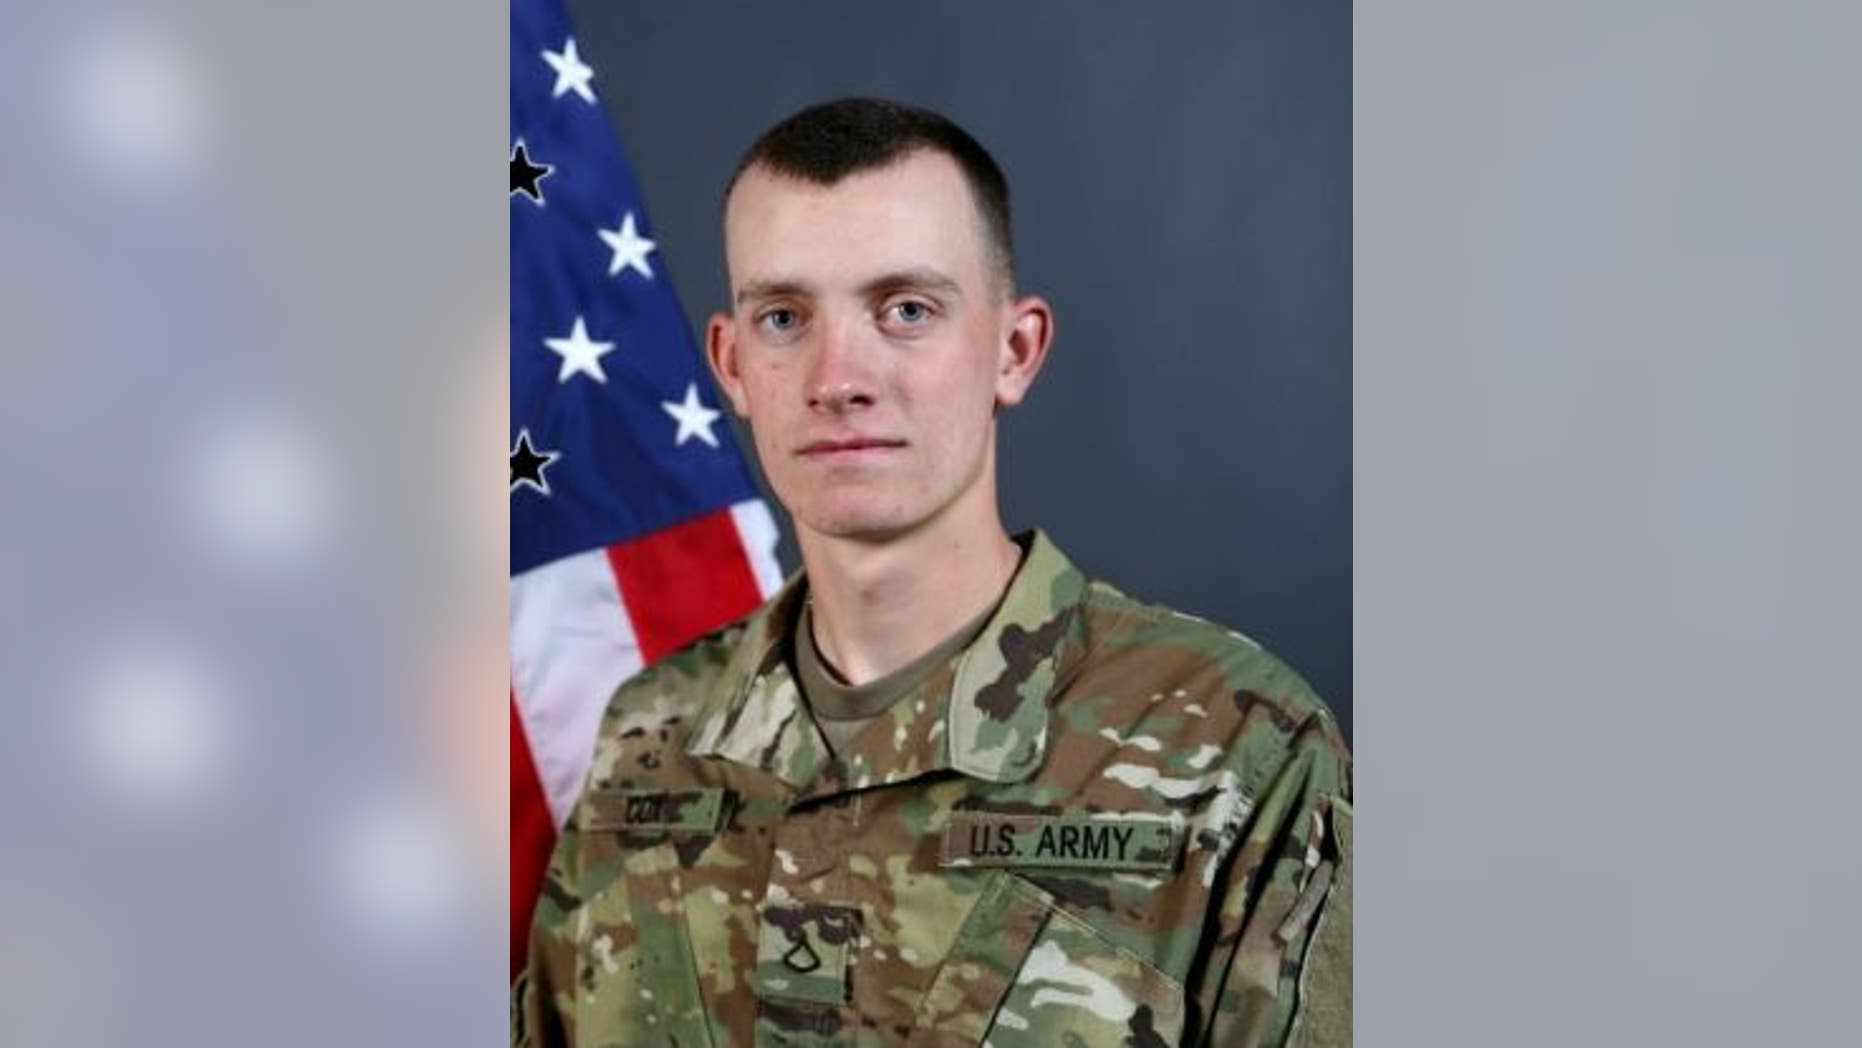 Pfc. Matthew Cox, 19, died Tuesday after being swept by strong currents while he was swimming on a beach, officials said.